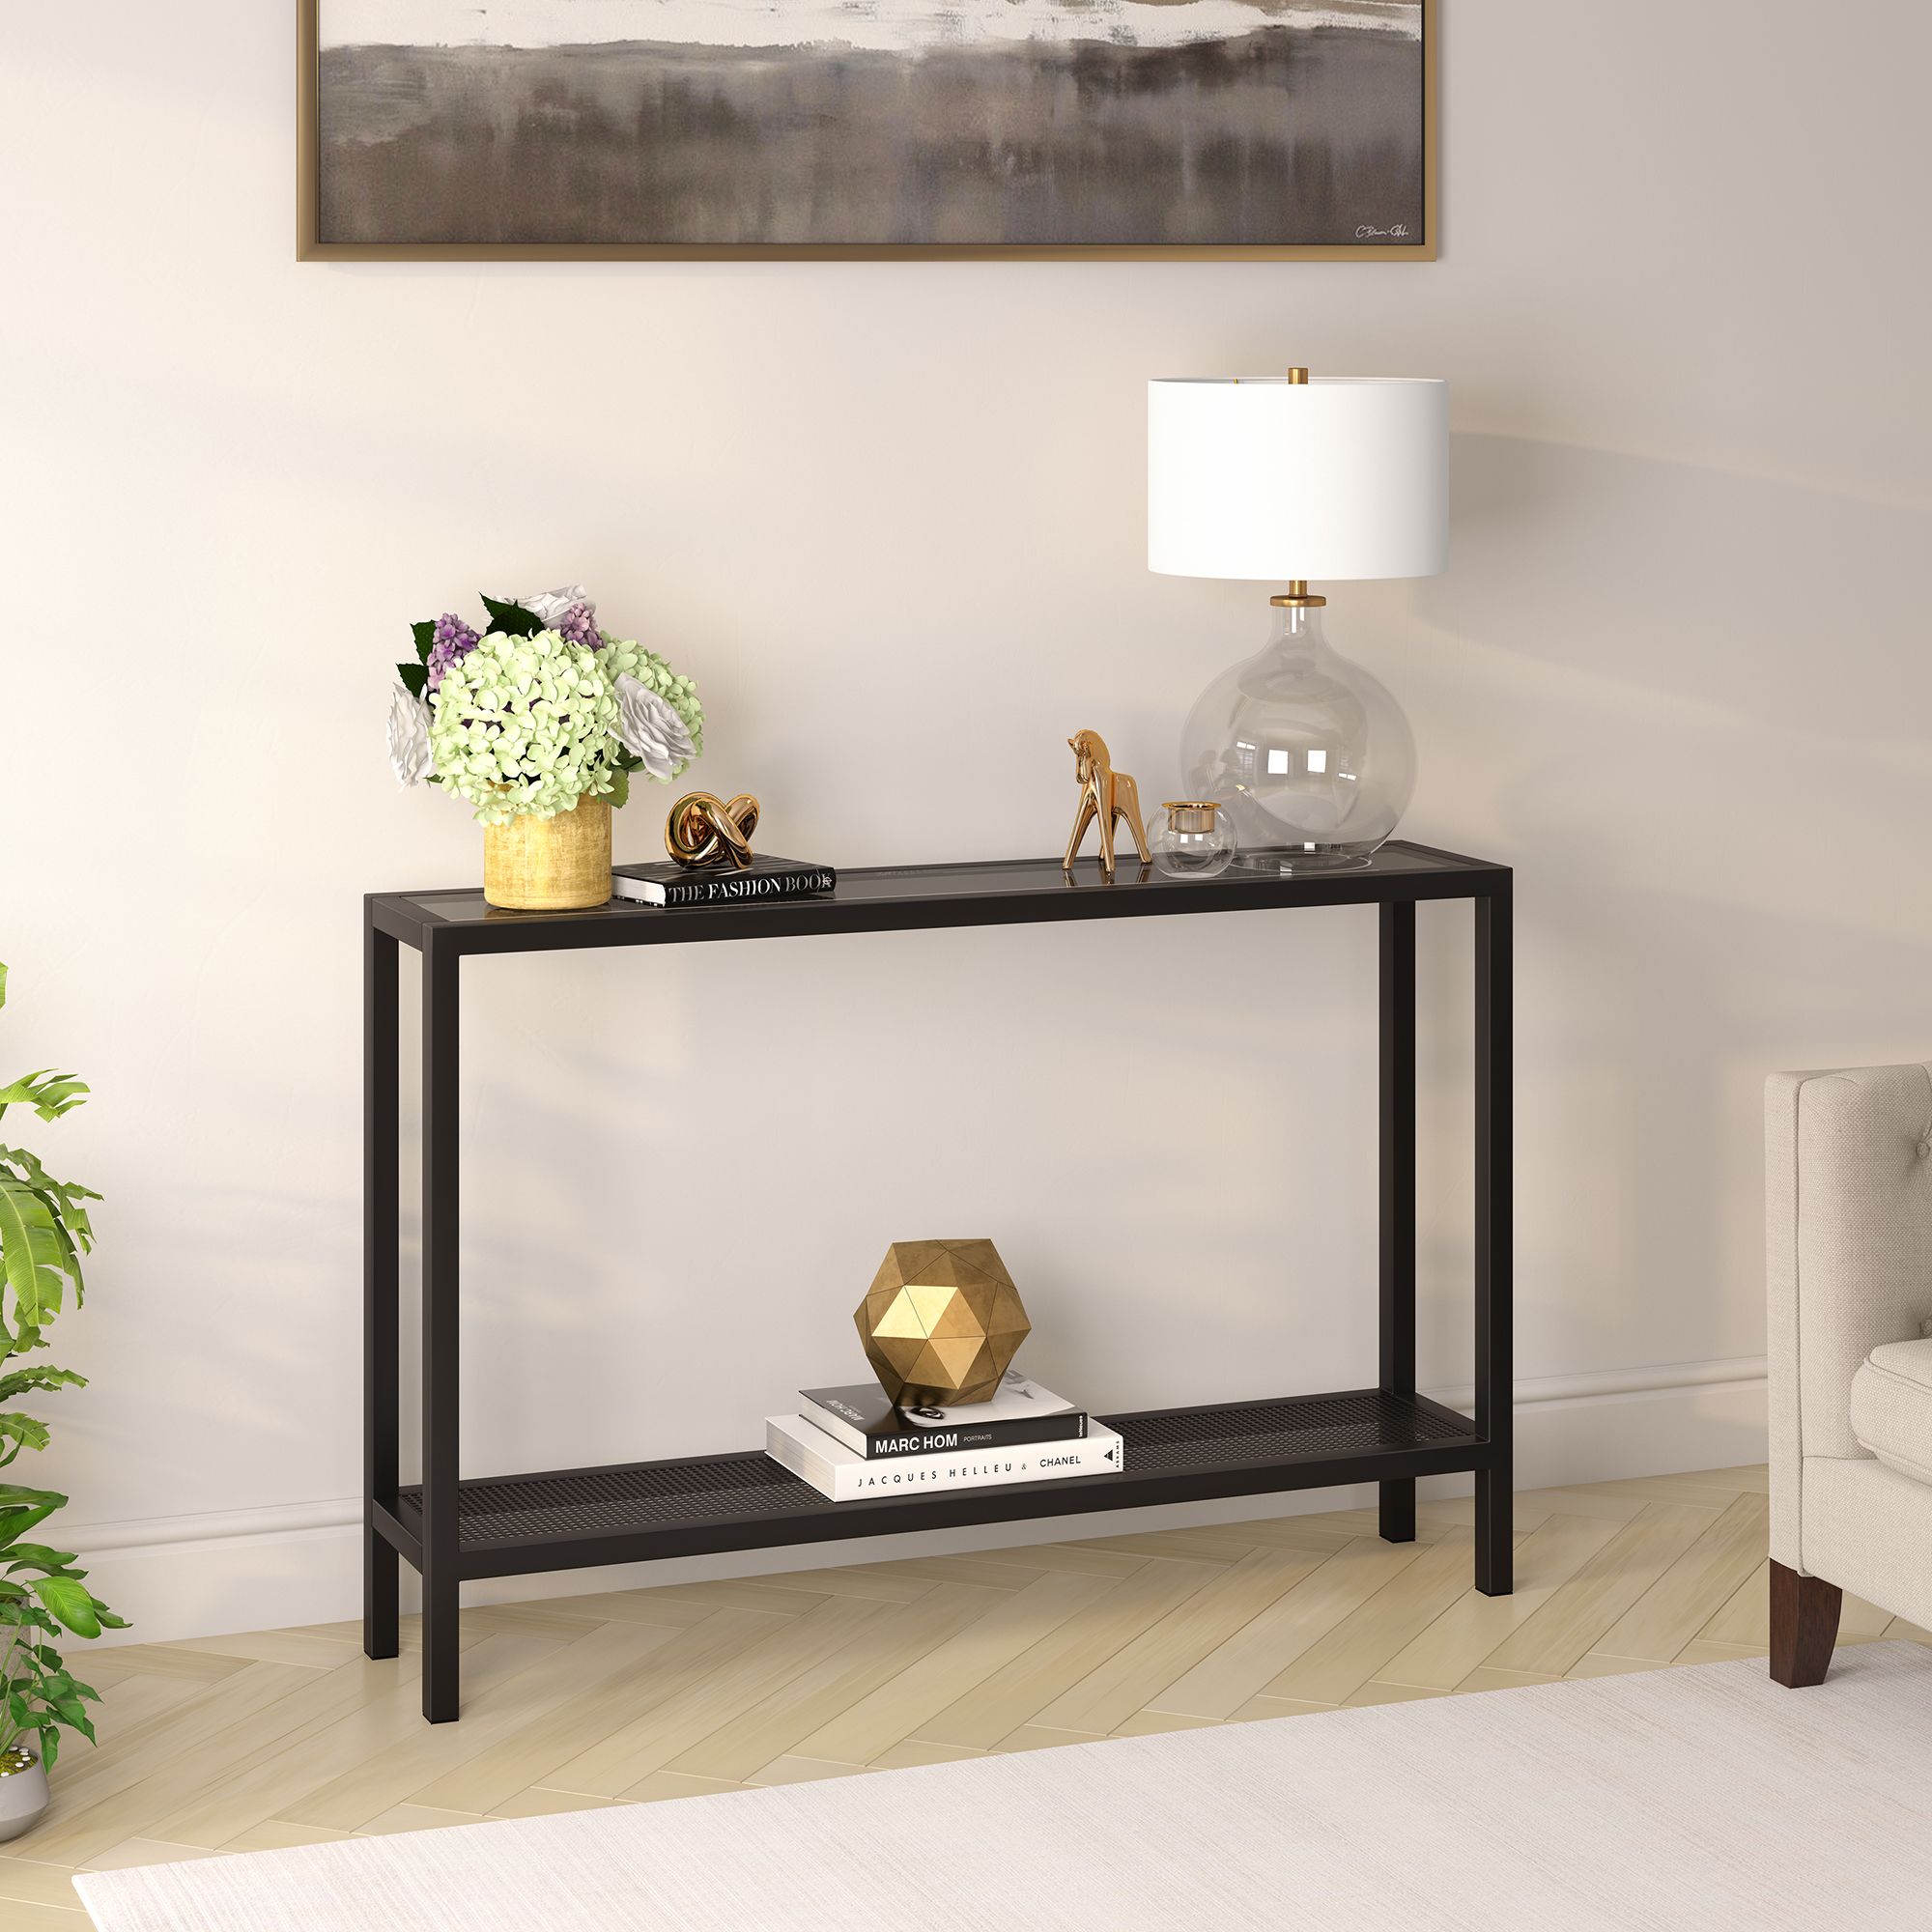 Evelyn&zoe Contemporary Metal Console Table With Glass Top – Walmart With Regard To Black Metal Console Tables (View 2 of 20)